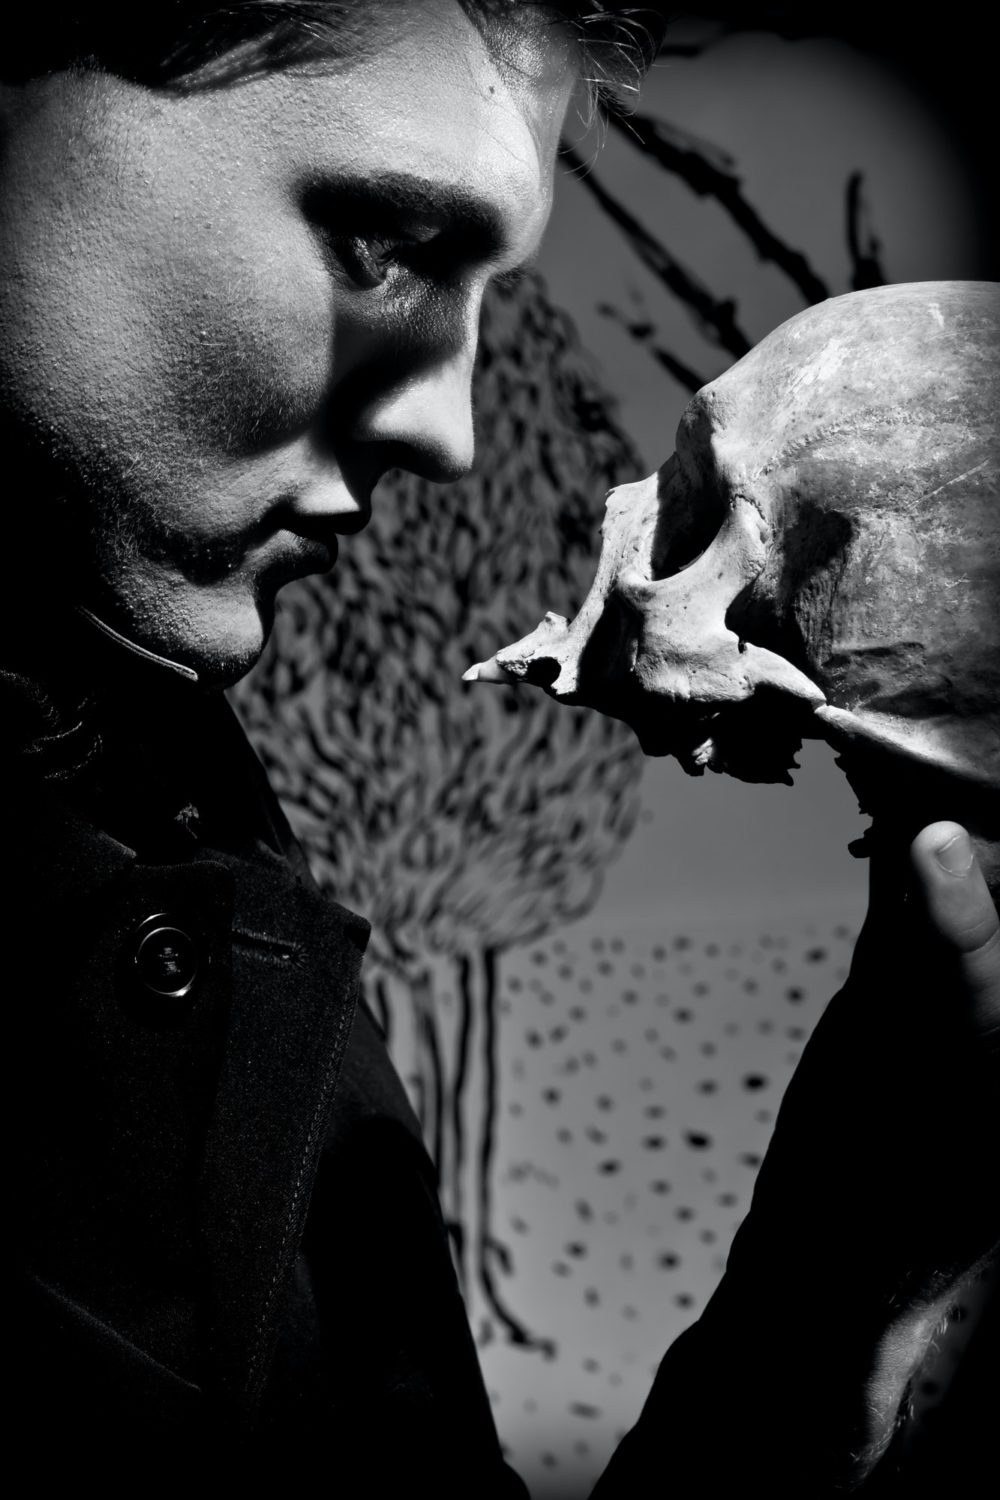 A young man dressed in black with a skull in his hands. Black and white. Artistic background created